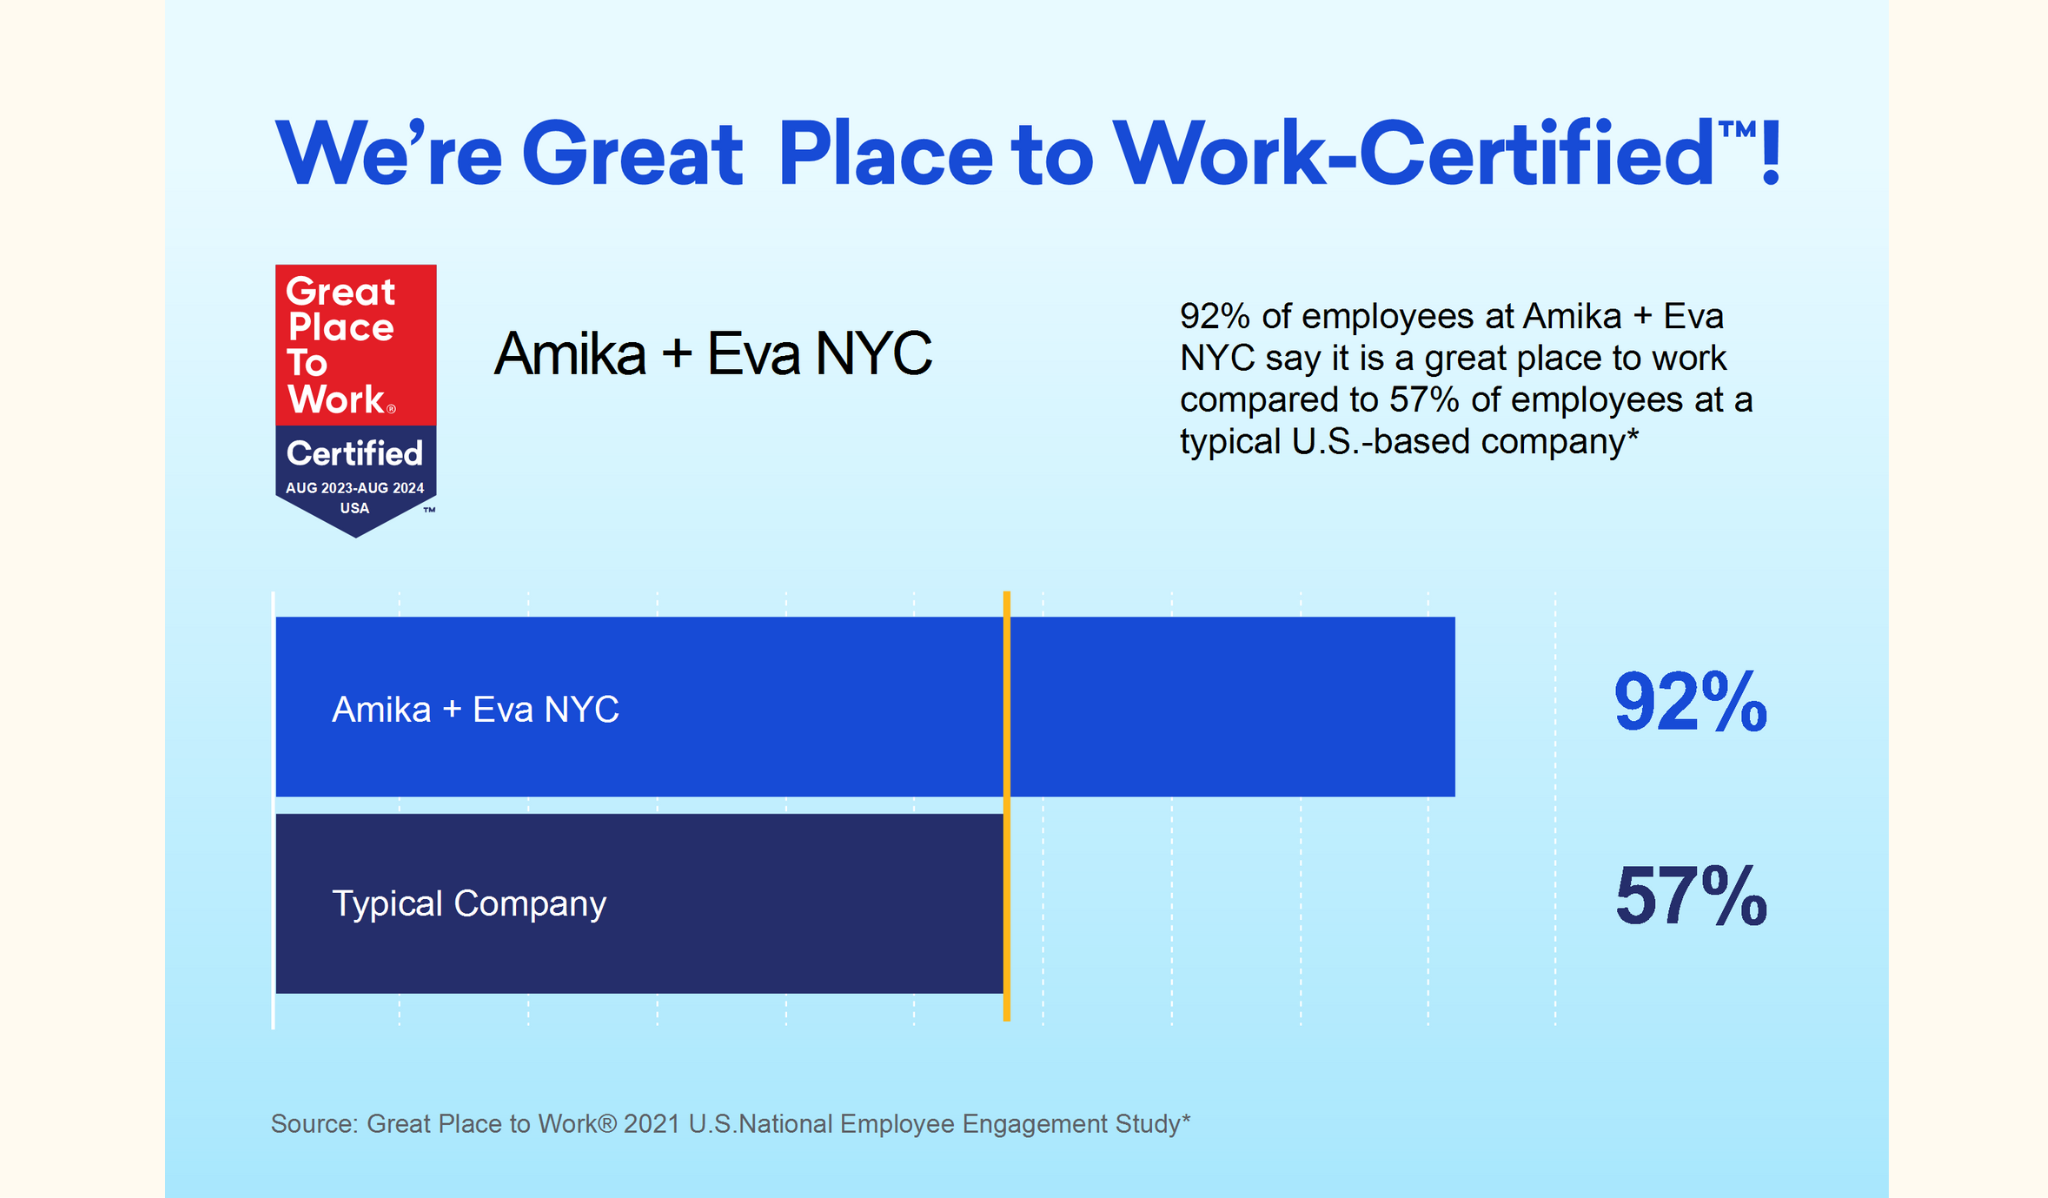 92% of amika + eva nyc employees say it's a great place to work